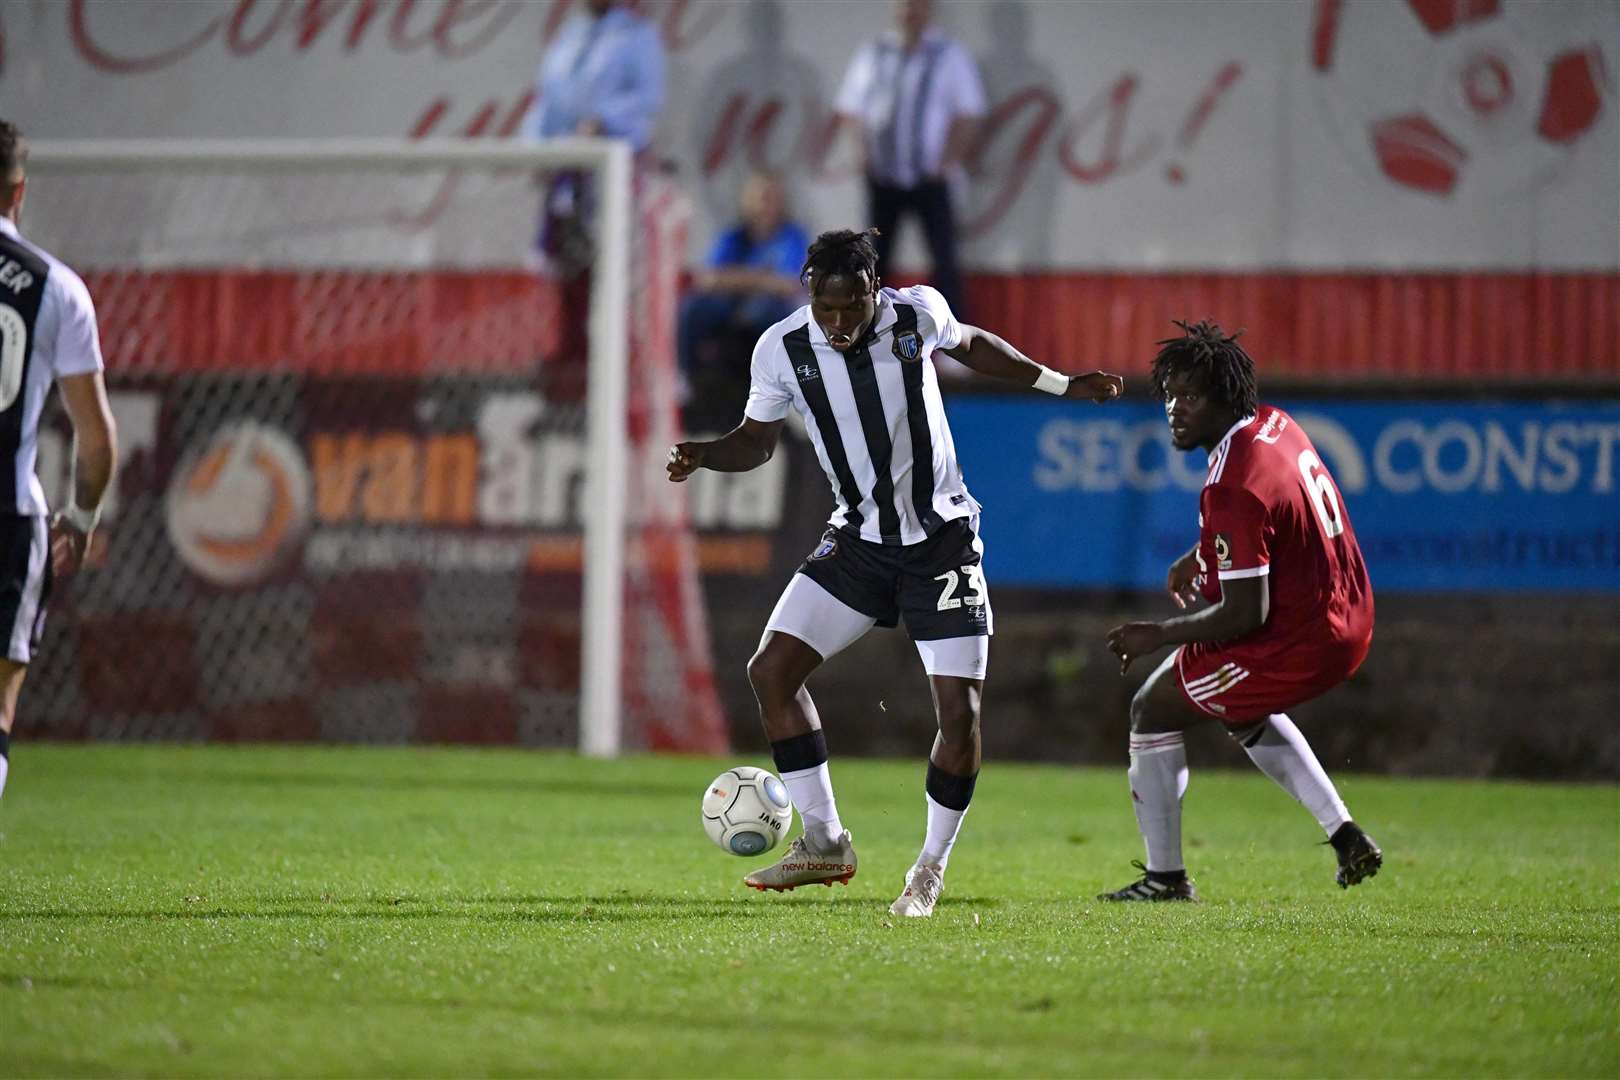 Noel Mbo with the ball for Gillingham Picture: Keith Gillard